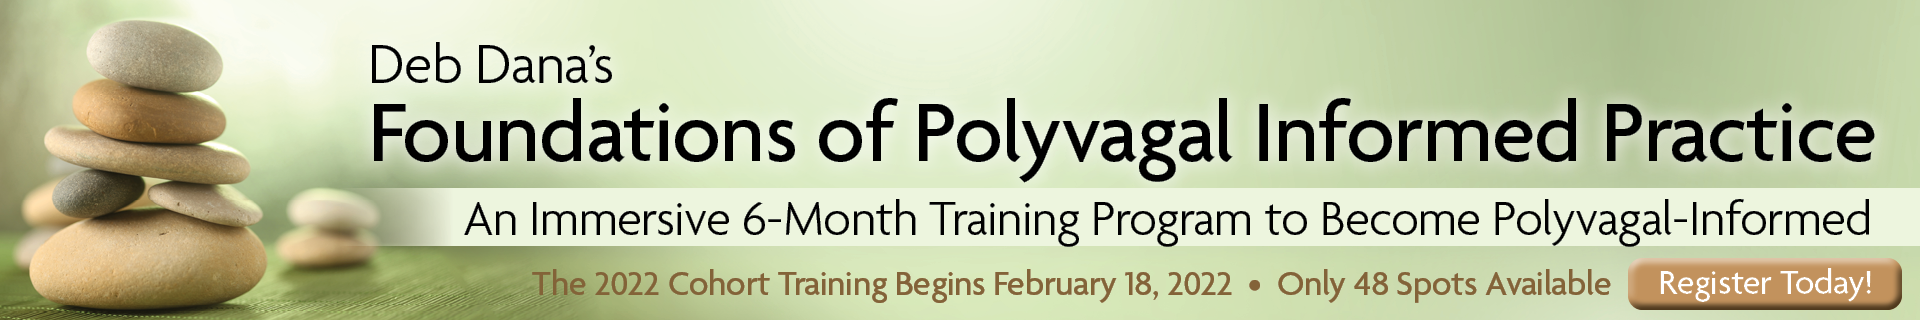 Deb Dana's Foundations of Polyvagal Informed Practice: An Immersive 6-Month Training Program to Become Polyvagal-Informed